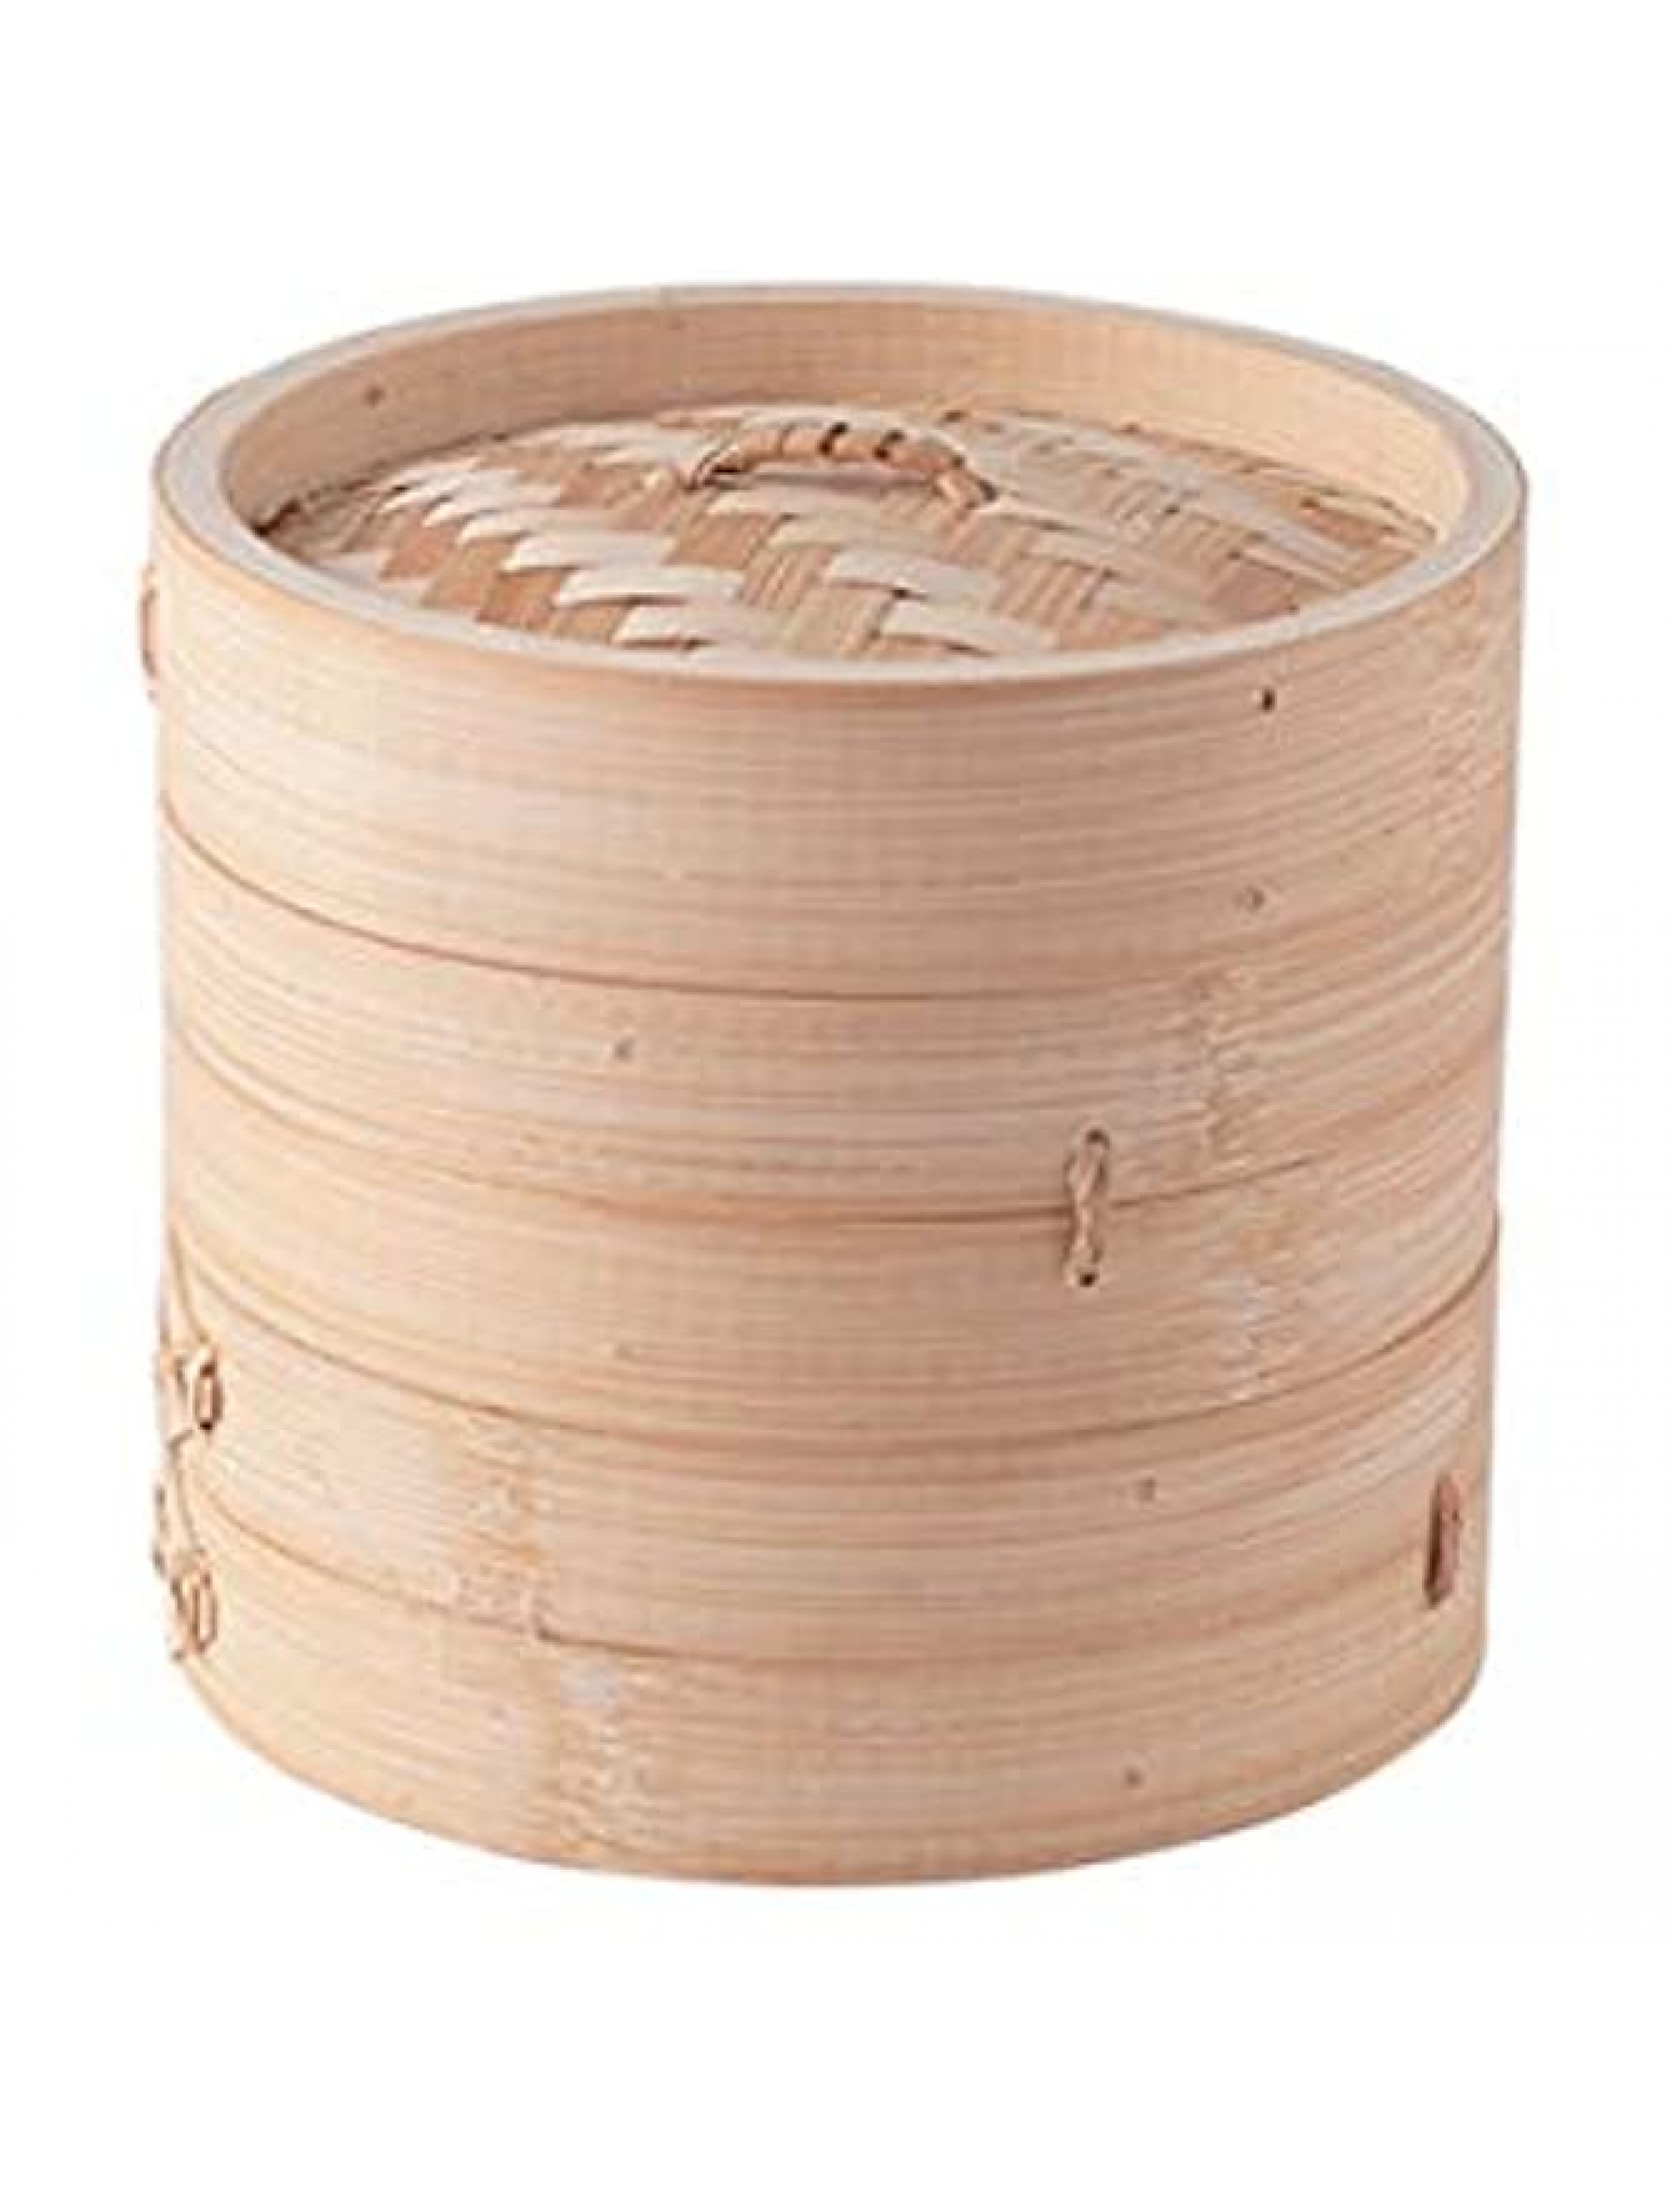 Hinomaru Collection Traditional Oriental Style Natural Bamboo Steamer Basket Stackable Dim Sum Vegetable Steamers 6 Inch Dia - BR4NI53JJ